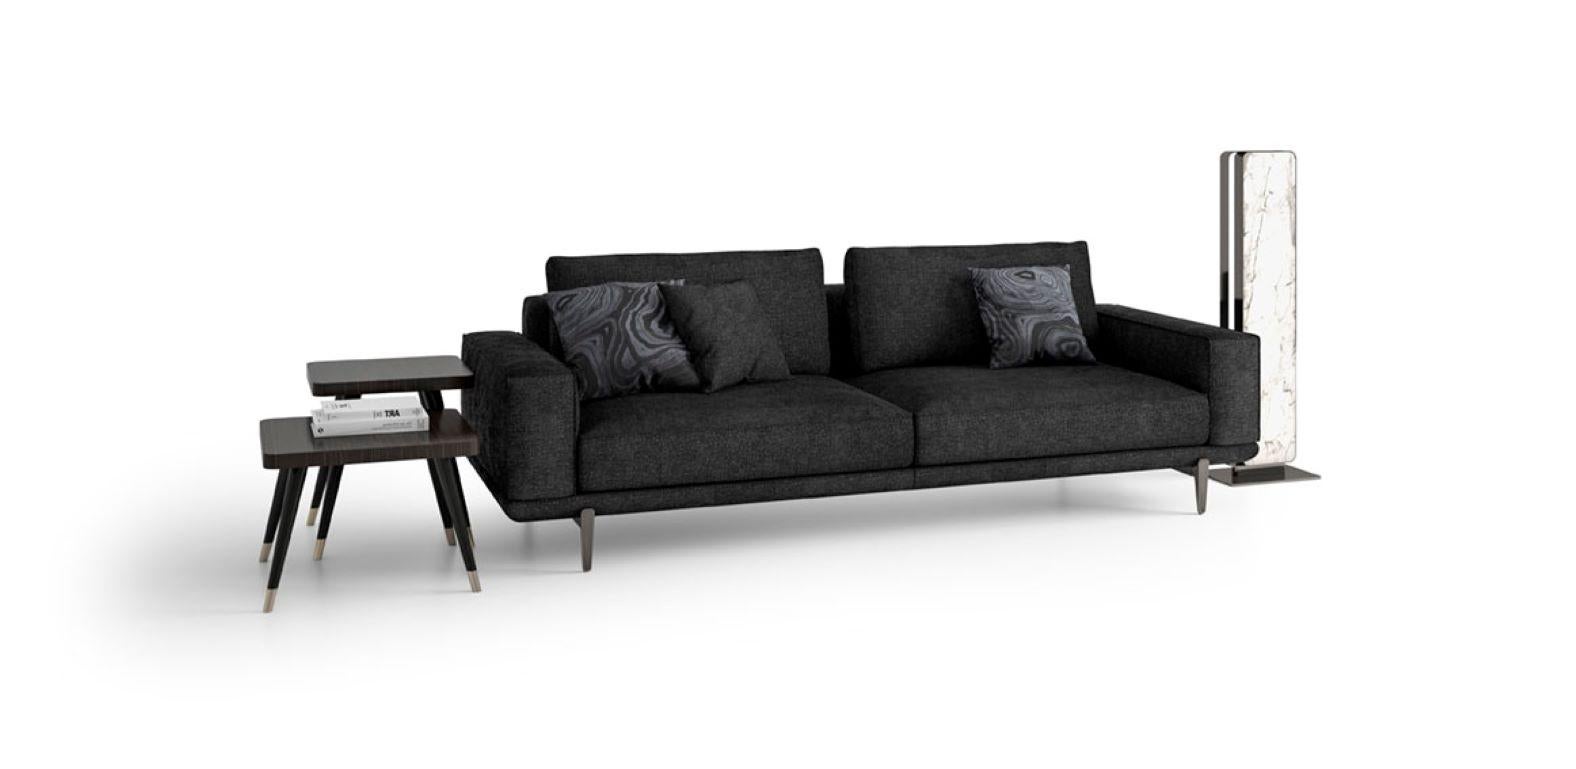 Italian Stylish Sofa 2 Seater 3 Seater or Modular Frame Solid Timber Backrest Pillows For Sale